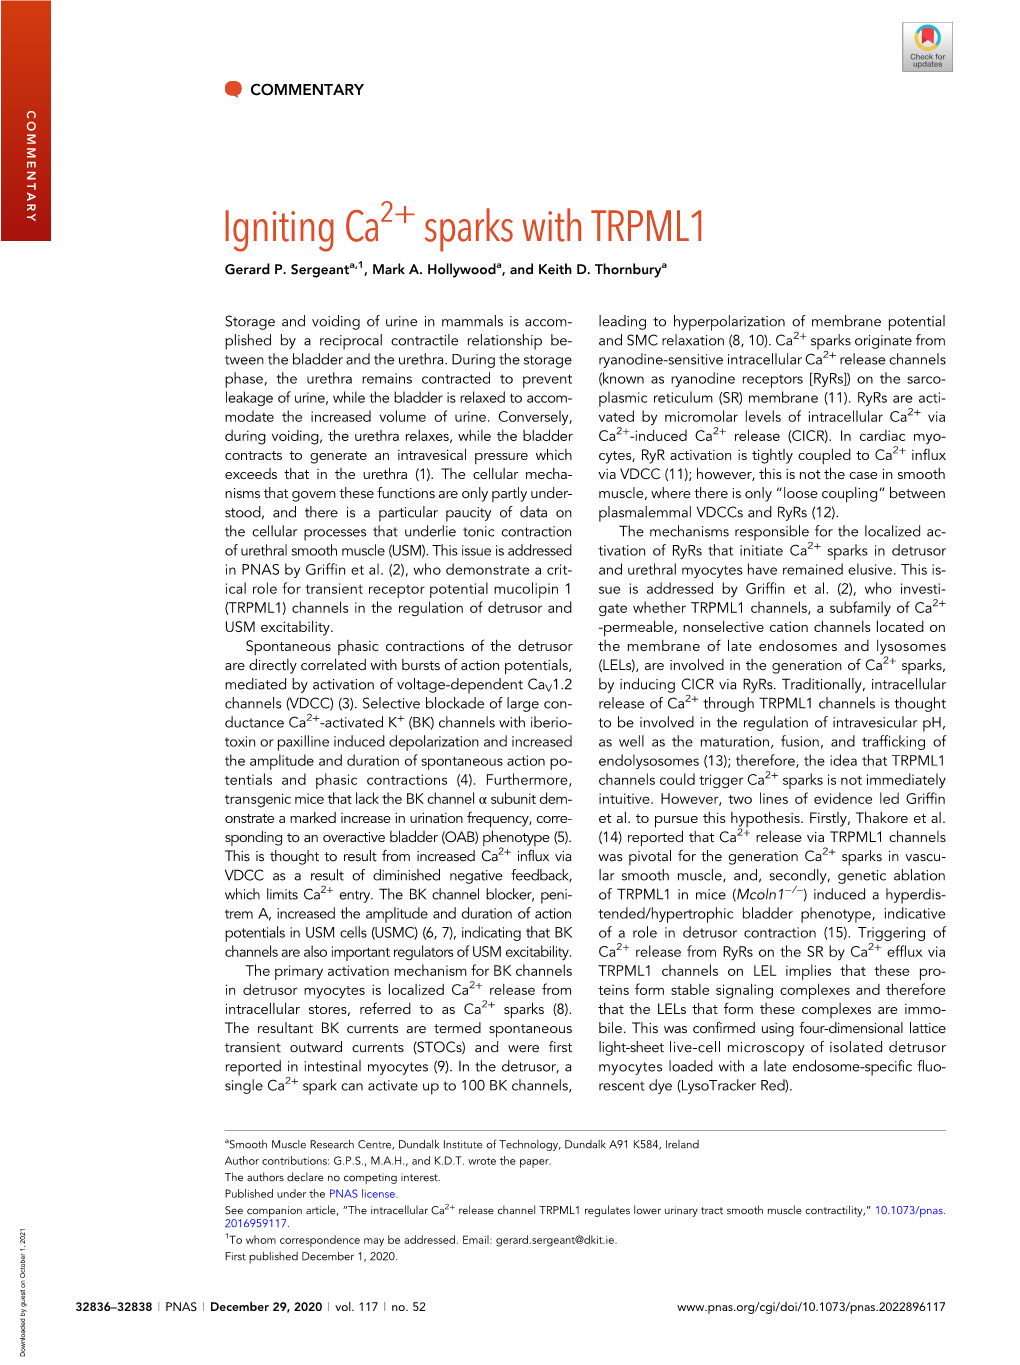 Igniting Ca2+ Sparks with TRPML1